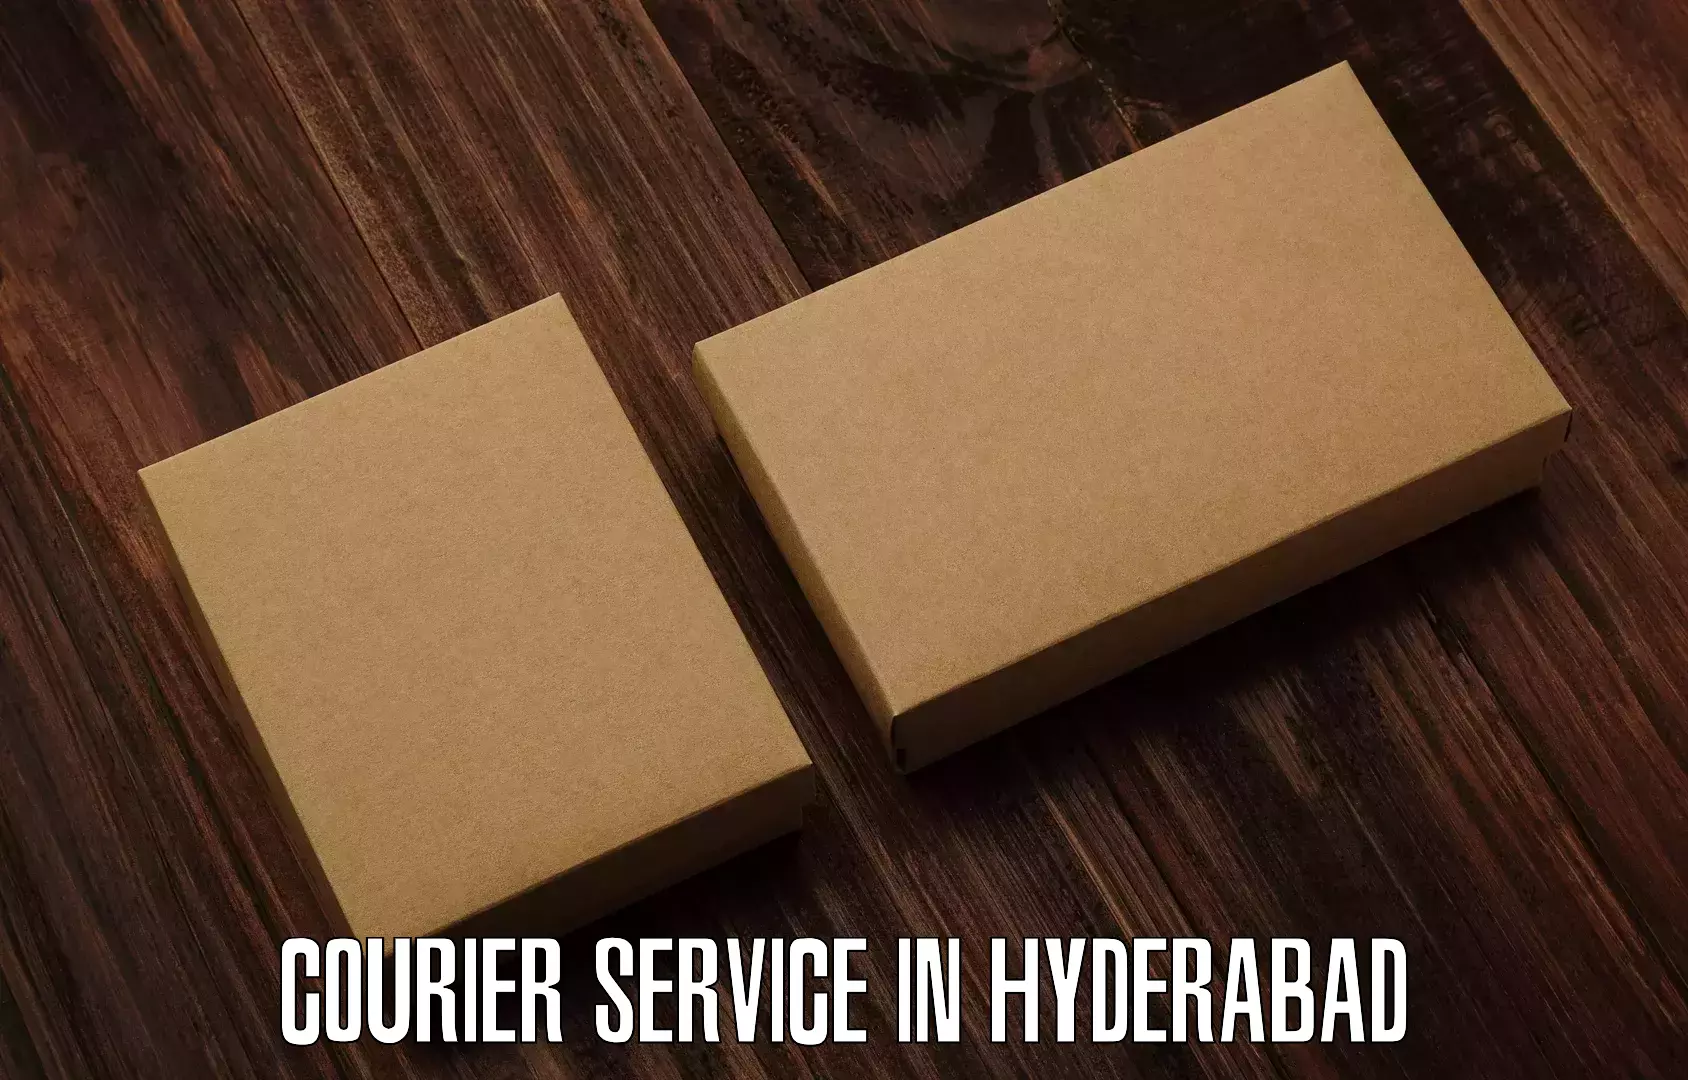 Enhanced shipping experience in Hyderabad